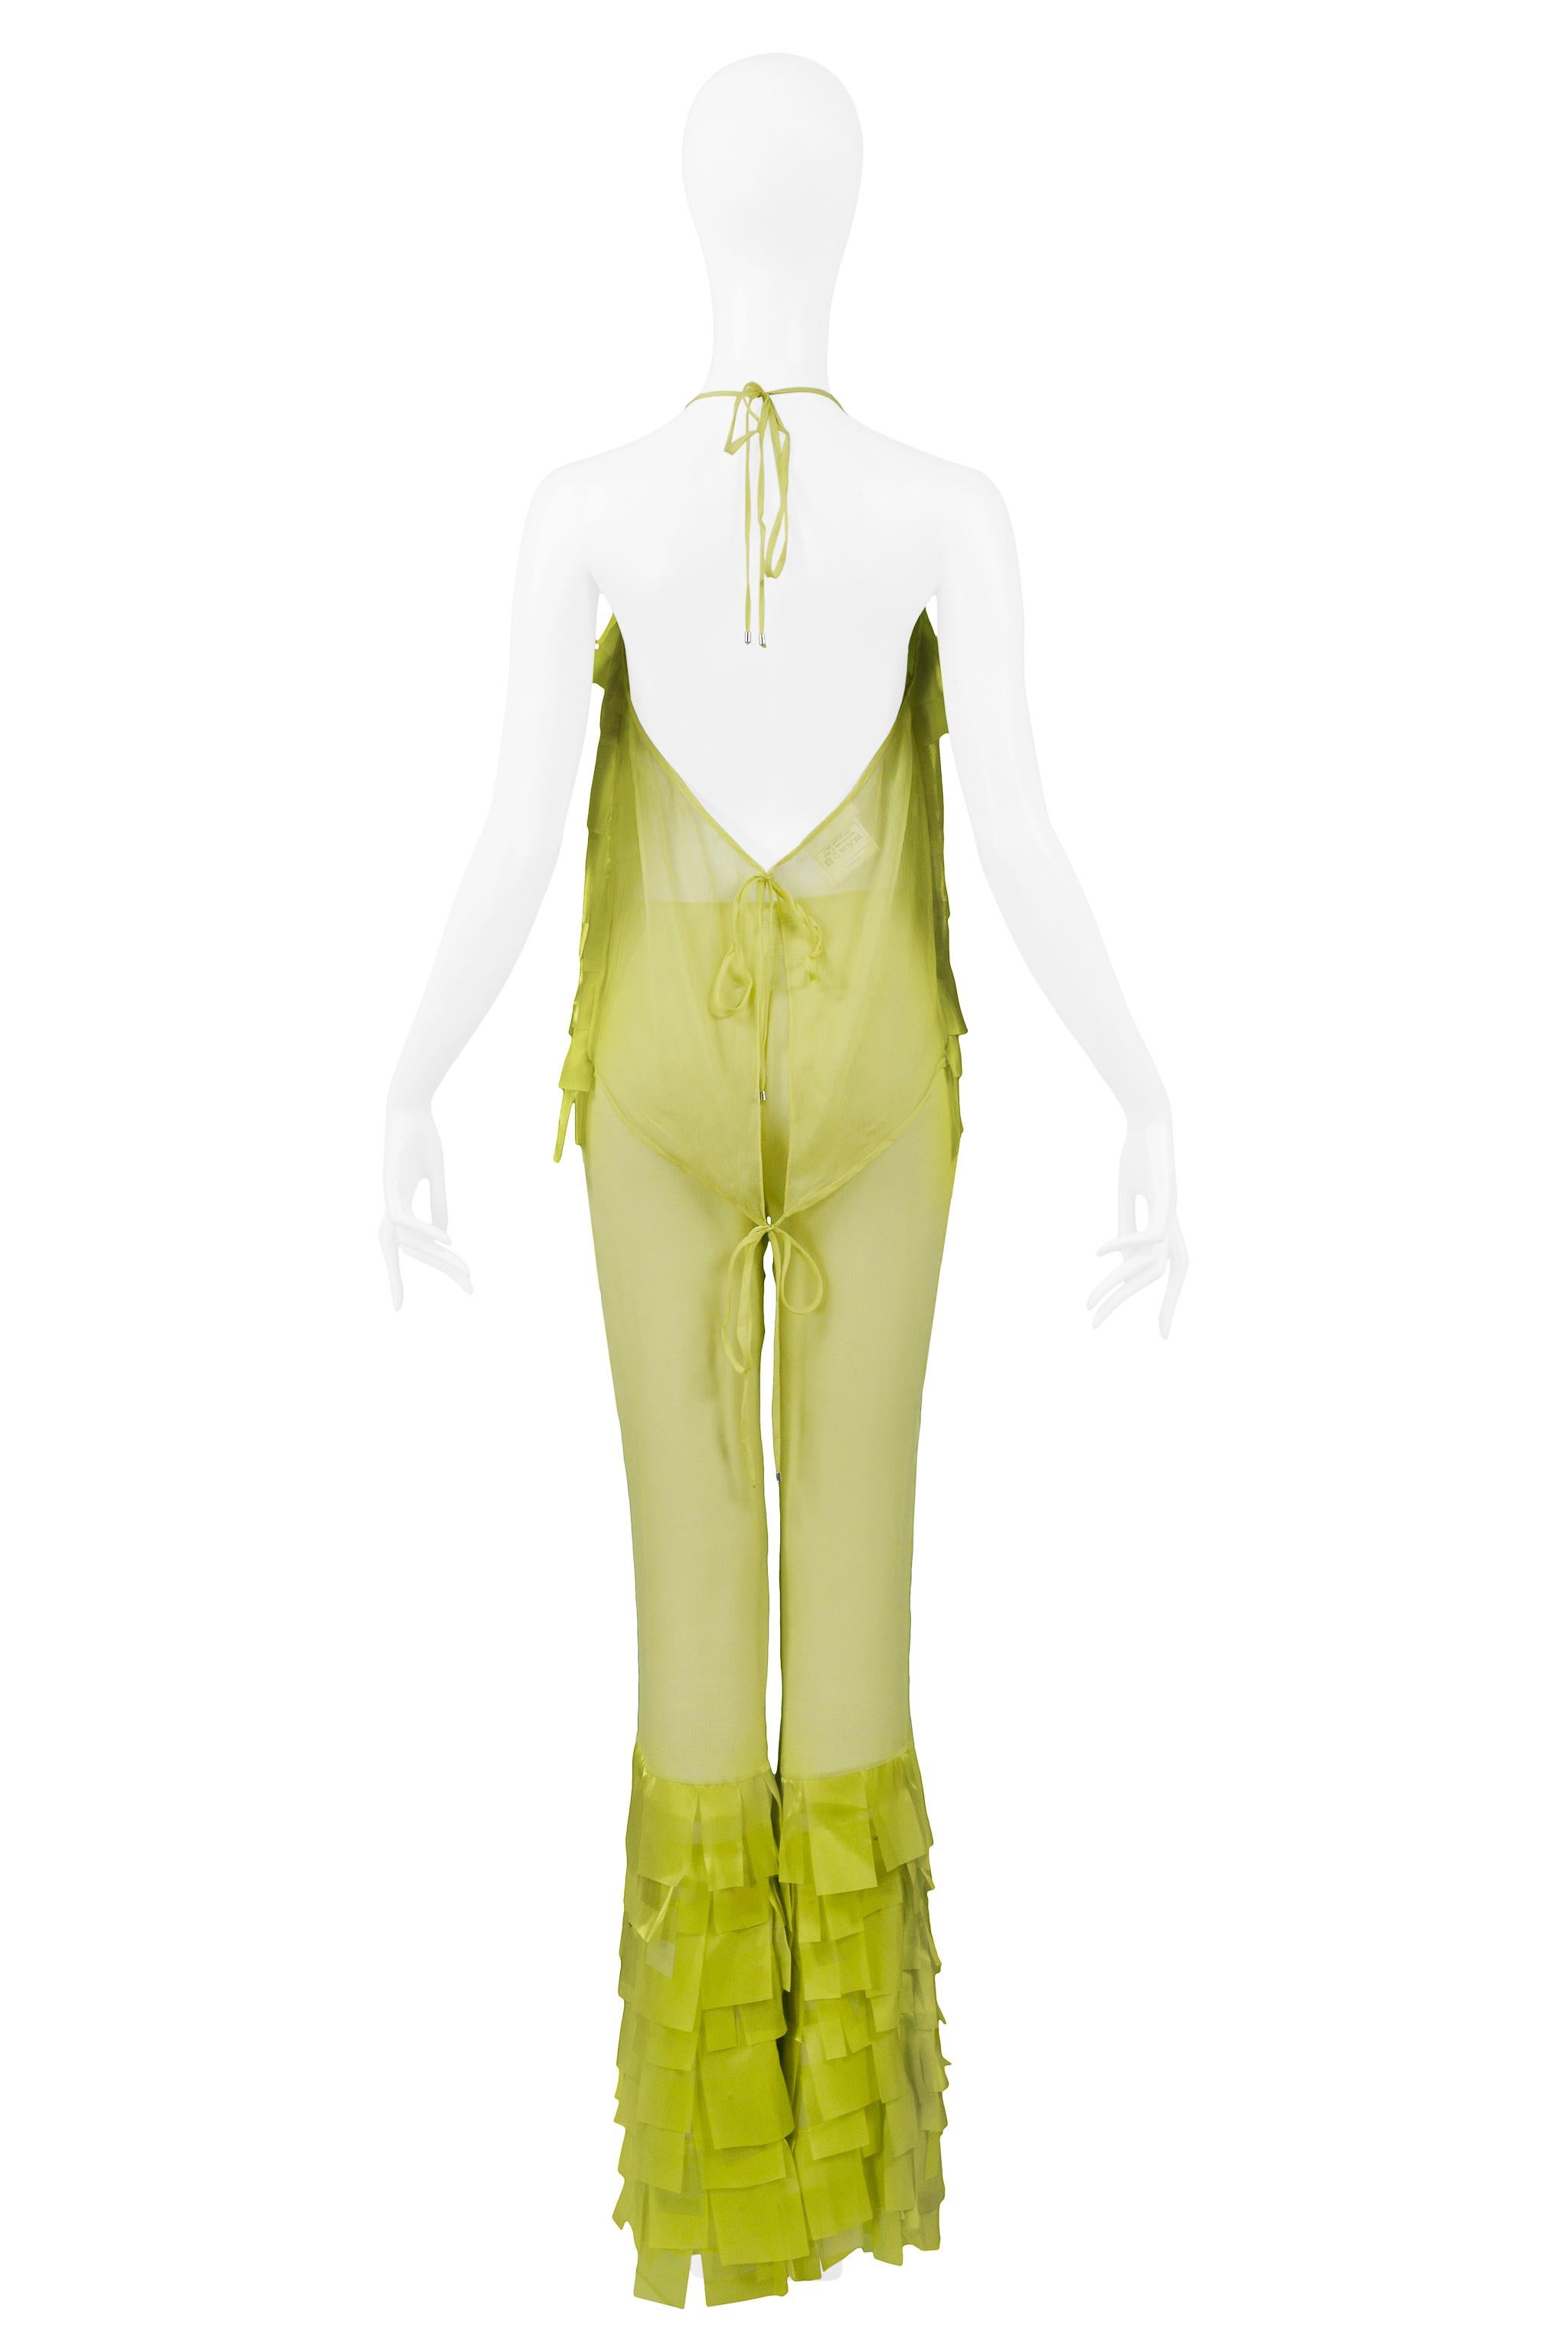 Paco Rabanne Chartreuse Green Textured Top & Bell Bottom Pants 2001 1